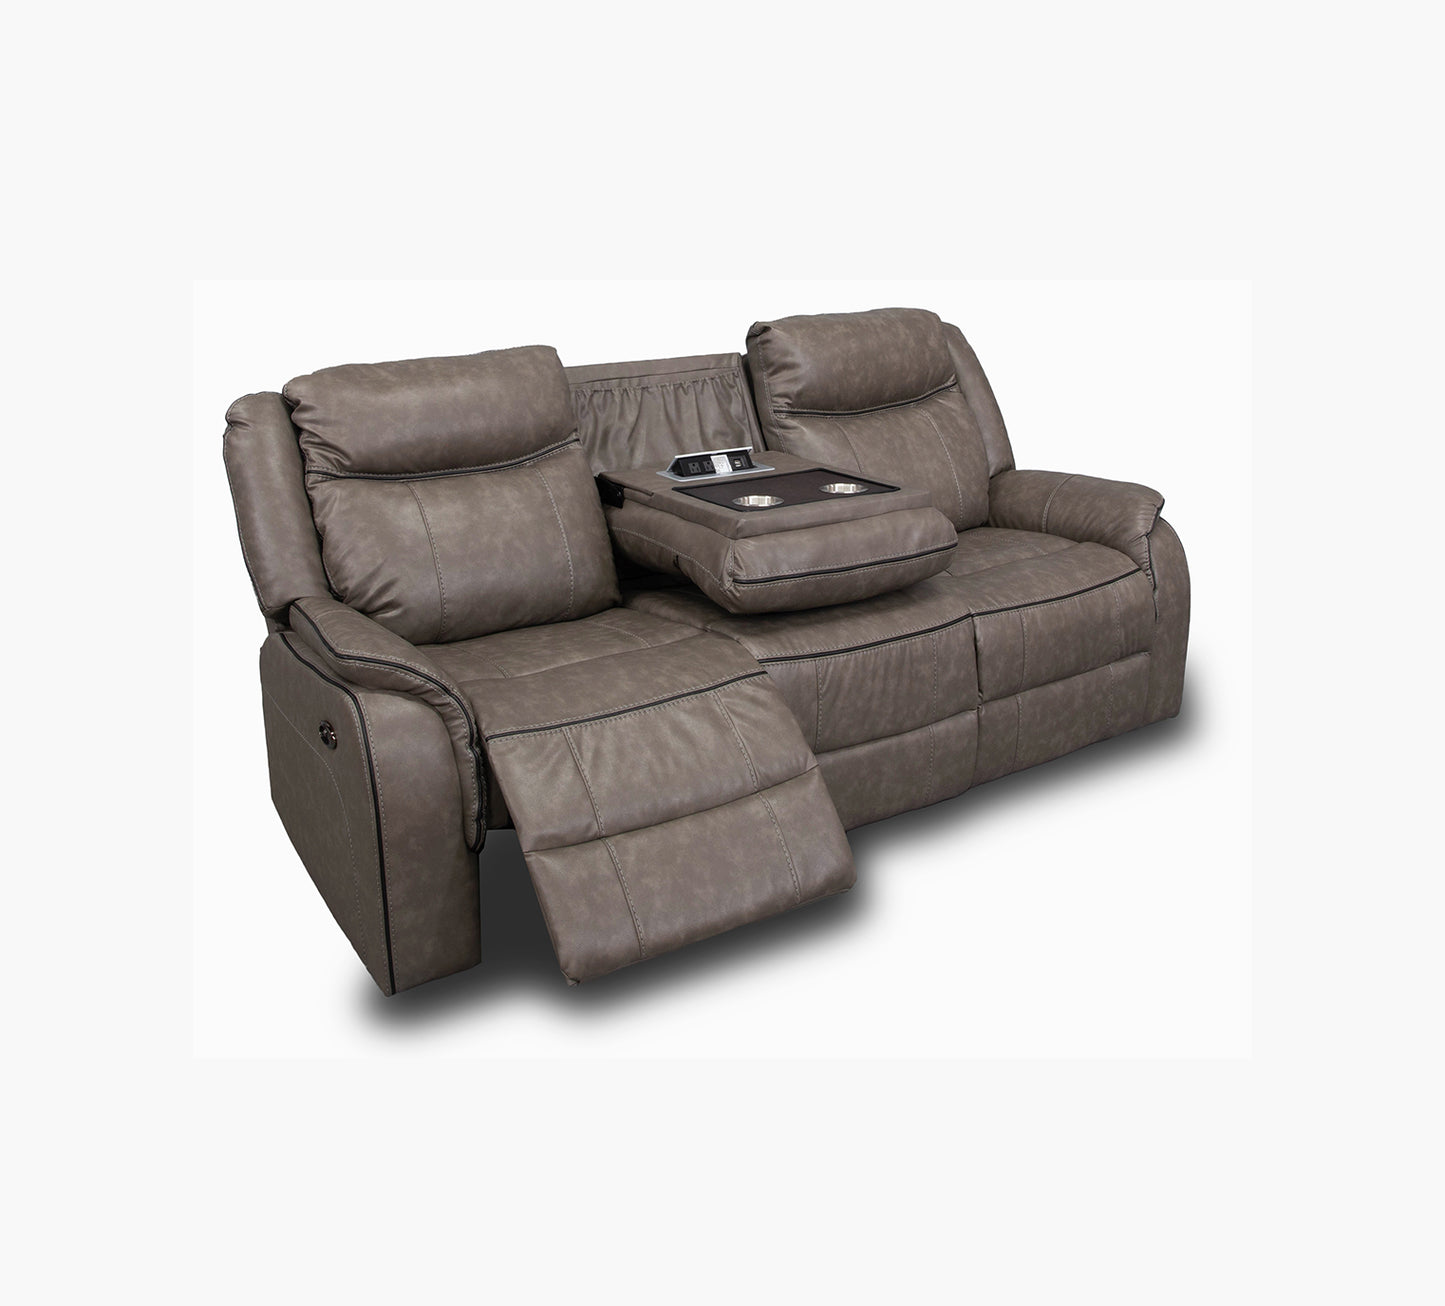 Scorpion Reclining Sofa with Drop Down Table